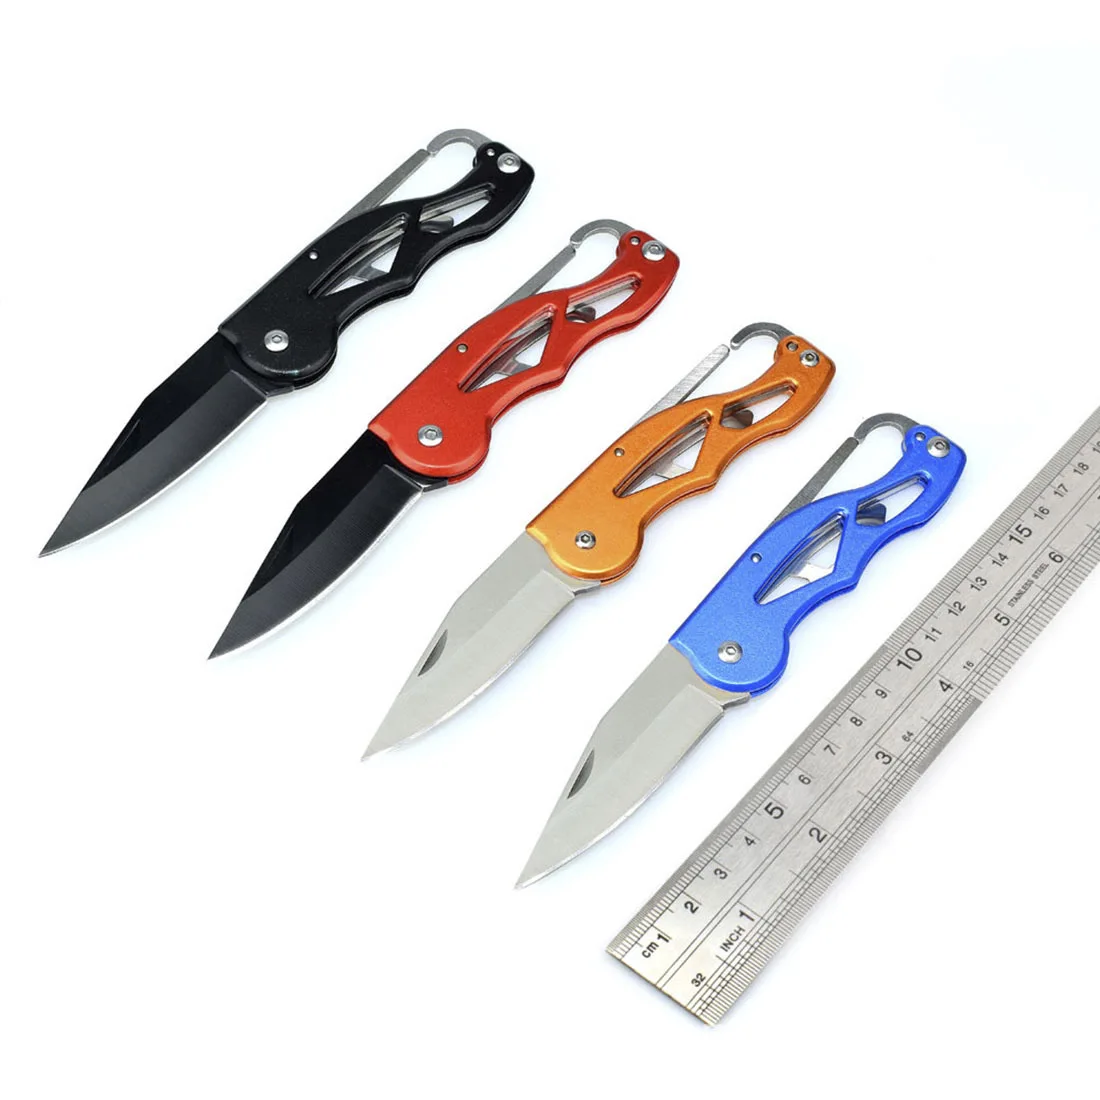 

Multifunction Folding Fold Knife Portable Key Ring Camping Mini Peeler Keychain Tactical Rescue Survival Outdoor Tool Hunting